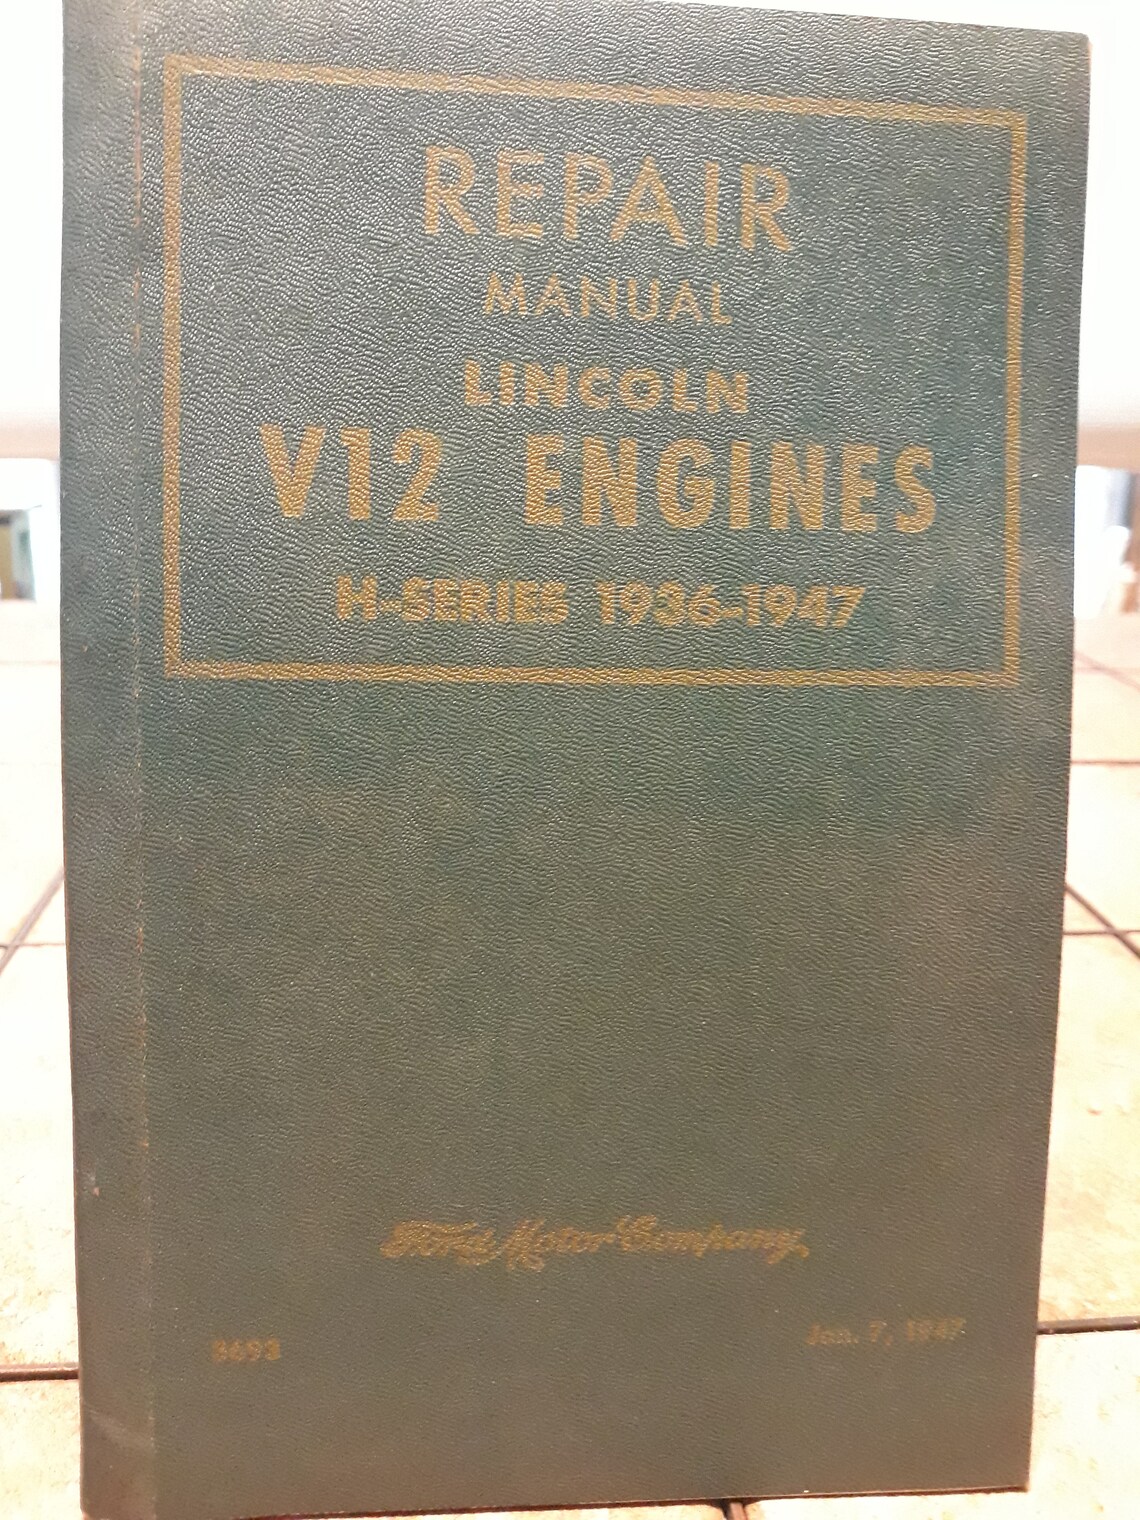 Repair Manual Lincoln V12 Engines HSeries 19361947 Ford Etsy